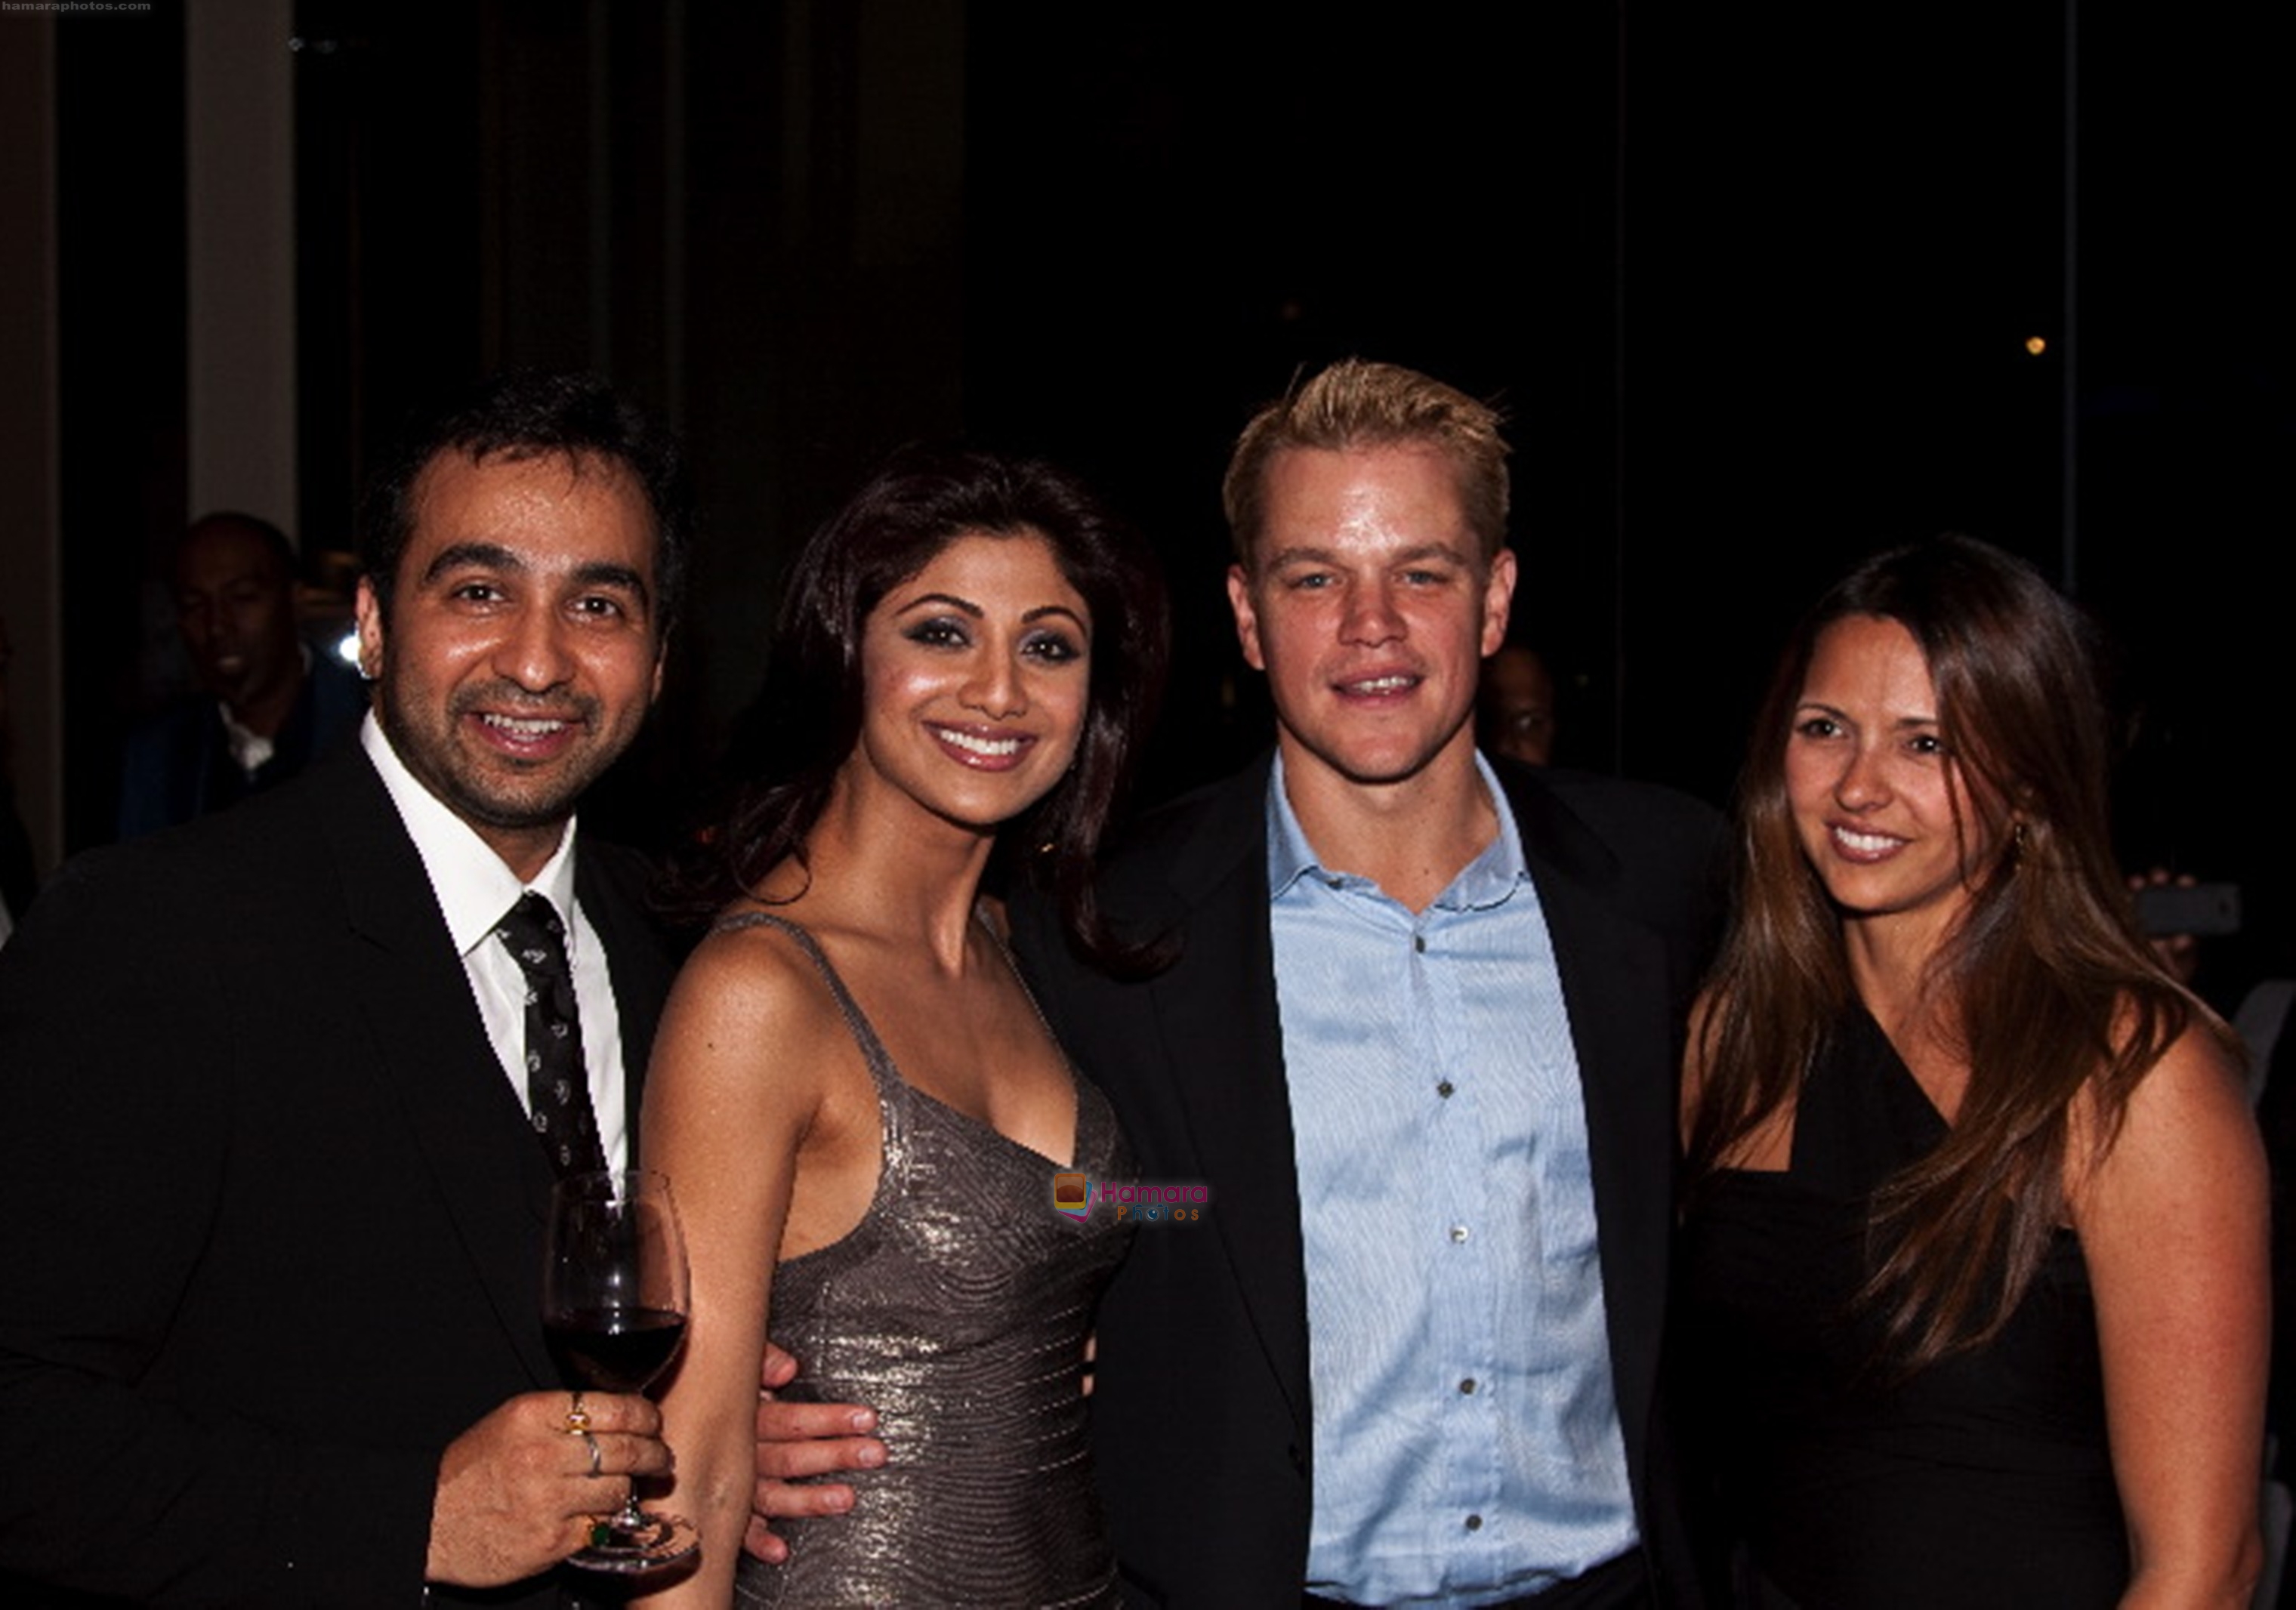 Hollywood Meets Bollywood at IPL -Shilpa Shetty, co-owner, Rajasthan Royals and Raj Kundra alongwith Hollywood Star Matt Damon and his wife Luciana at IPL Gala Dinner in Capetown South Africa